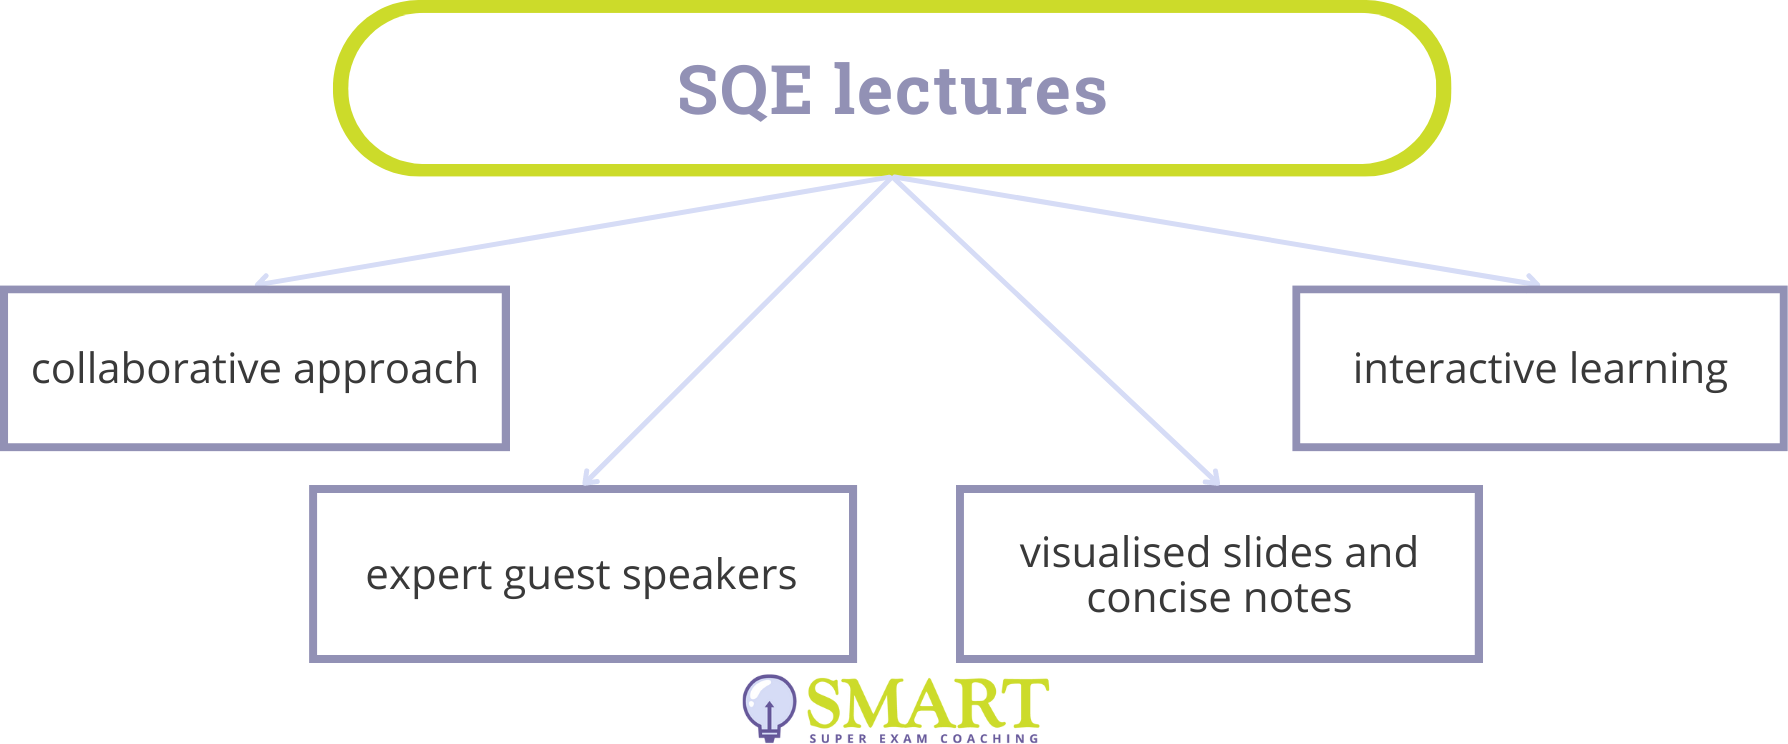 The Key Features of Our SQE Lectures